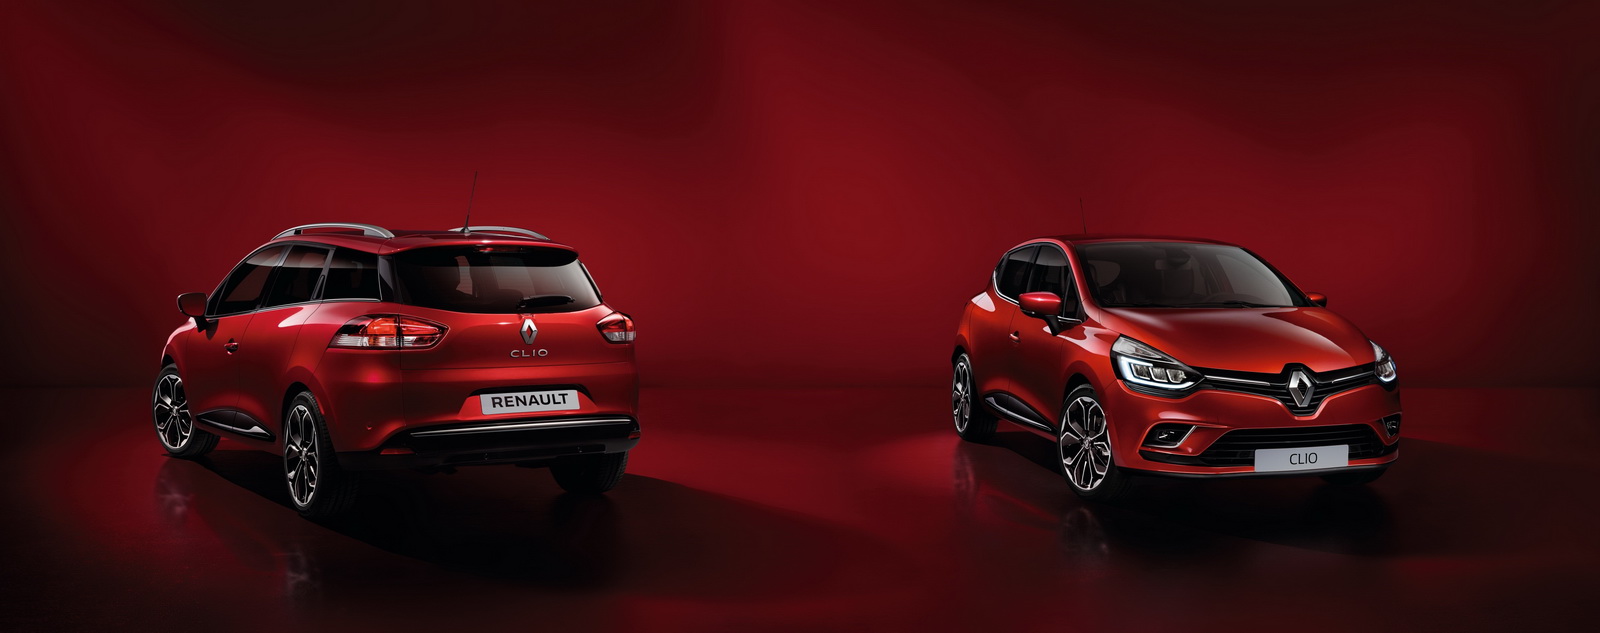 Renault Makes Clio Facelift More Appealing With Edition One